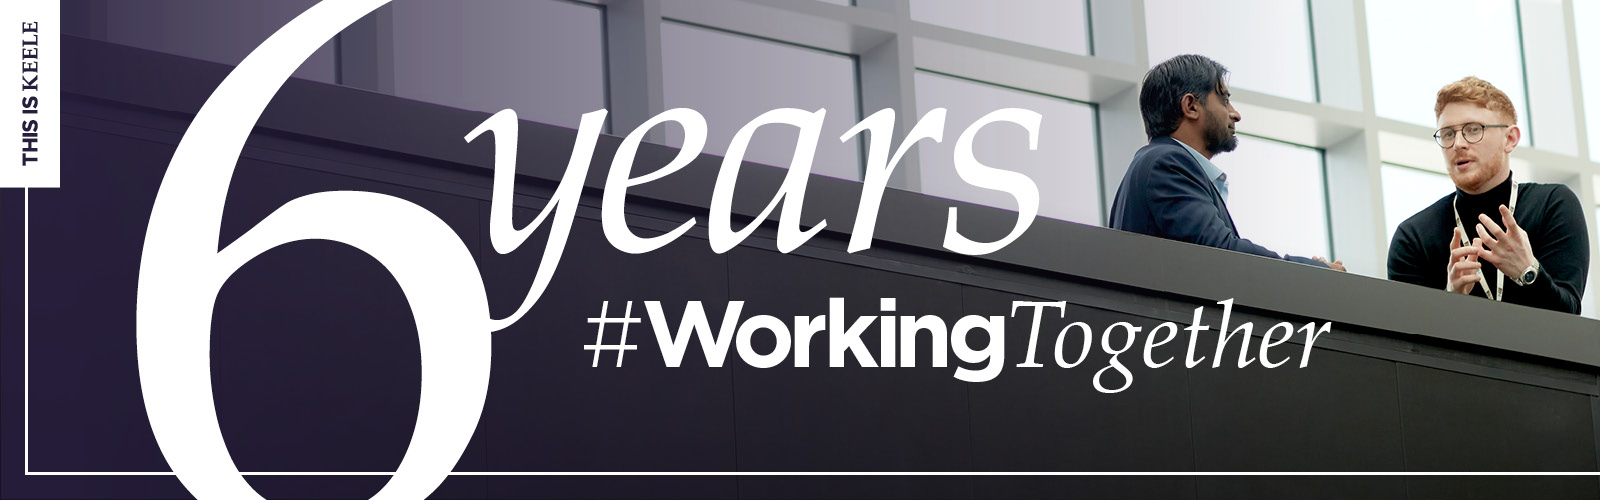 6 Years Working together banner 